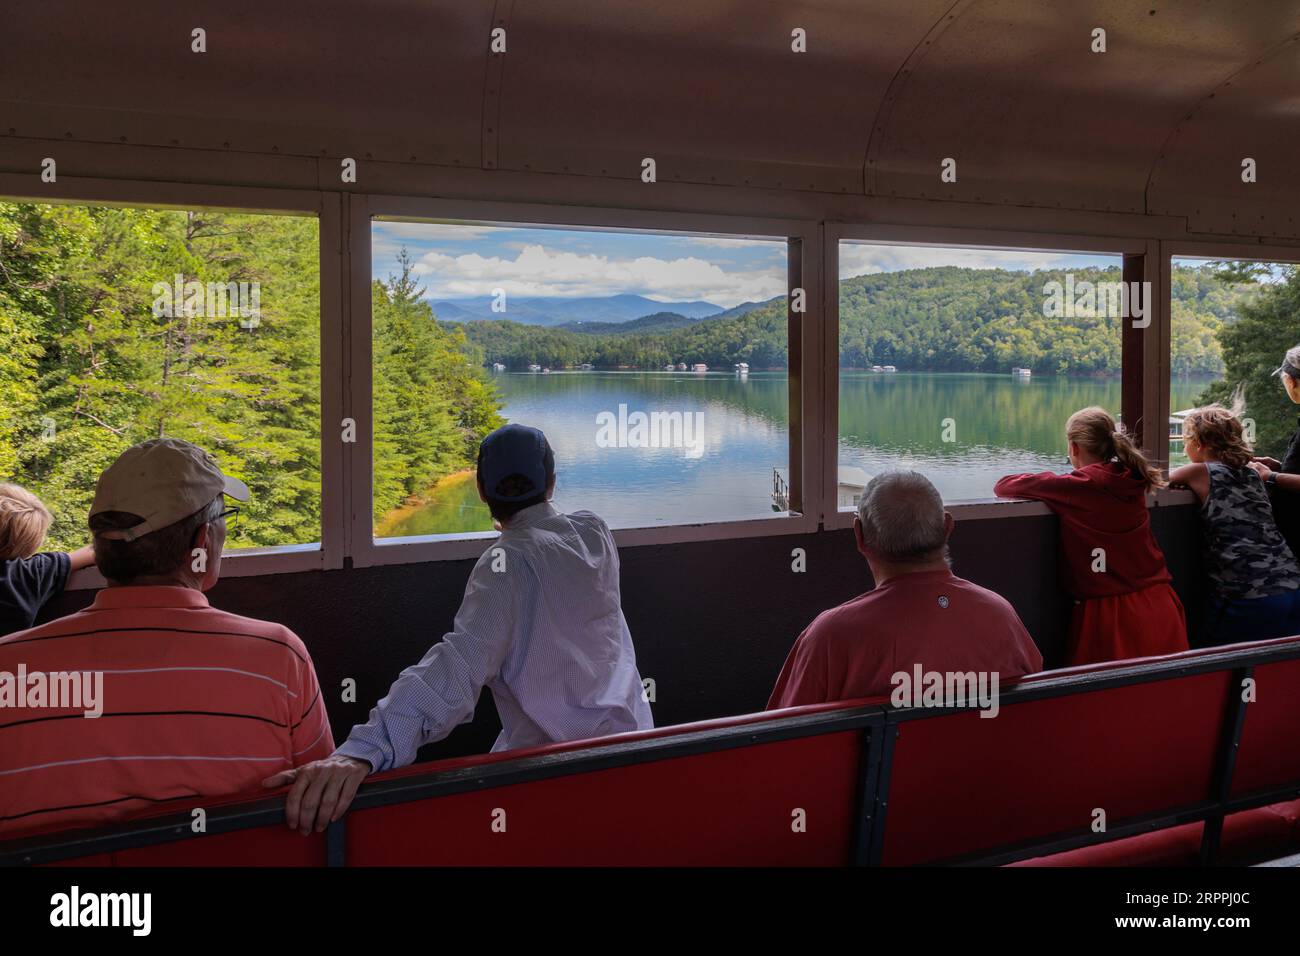 Great Smoky Mountains Railroad passengers looking out the windows of the open air train car  while on an excursion from Bryson City, North Carolina Stock Photo